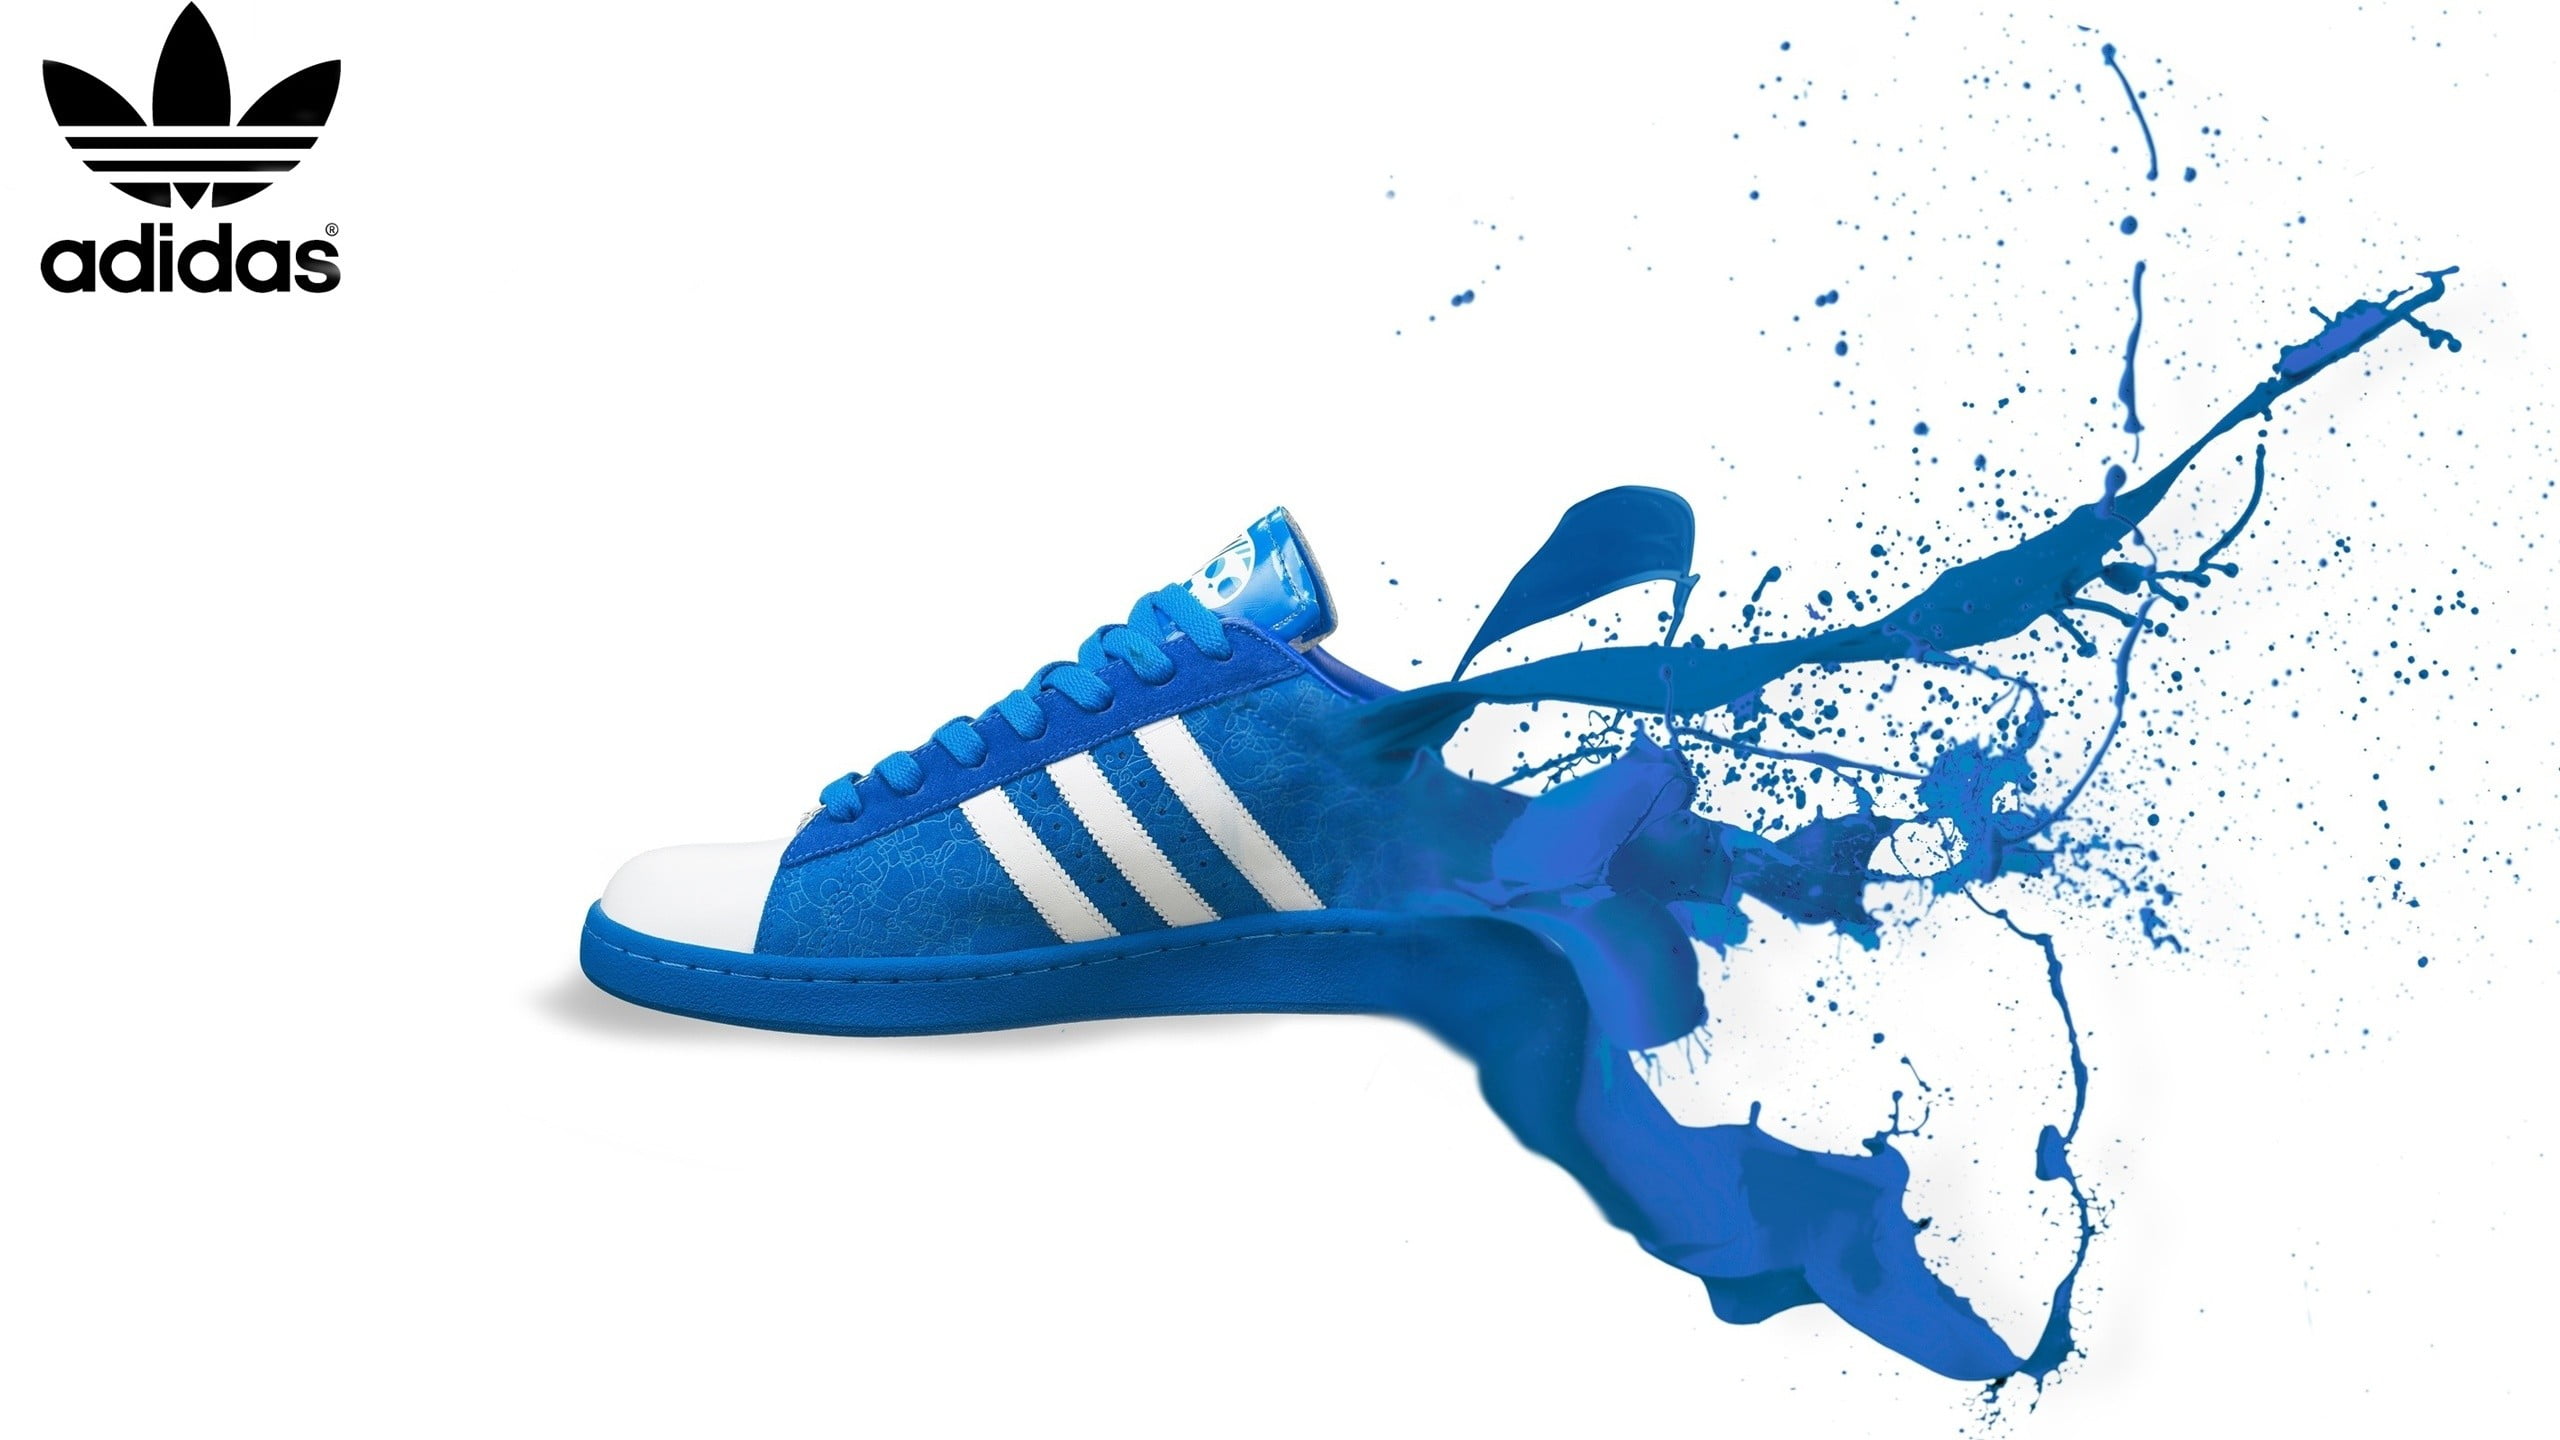 Unpaired blue and white adidas low-top sneaker, Adidas, shoes, paint ...